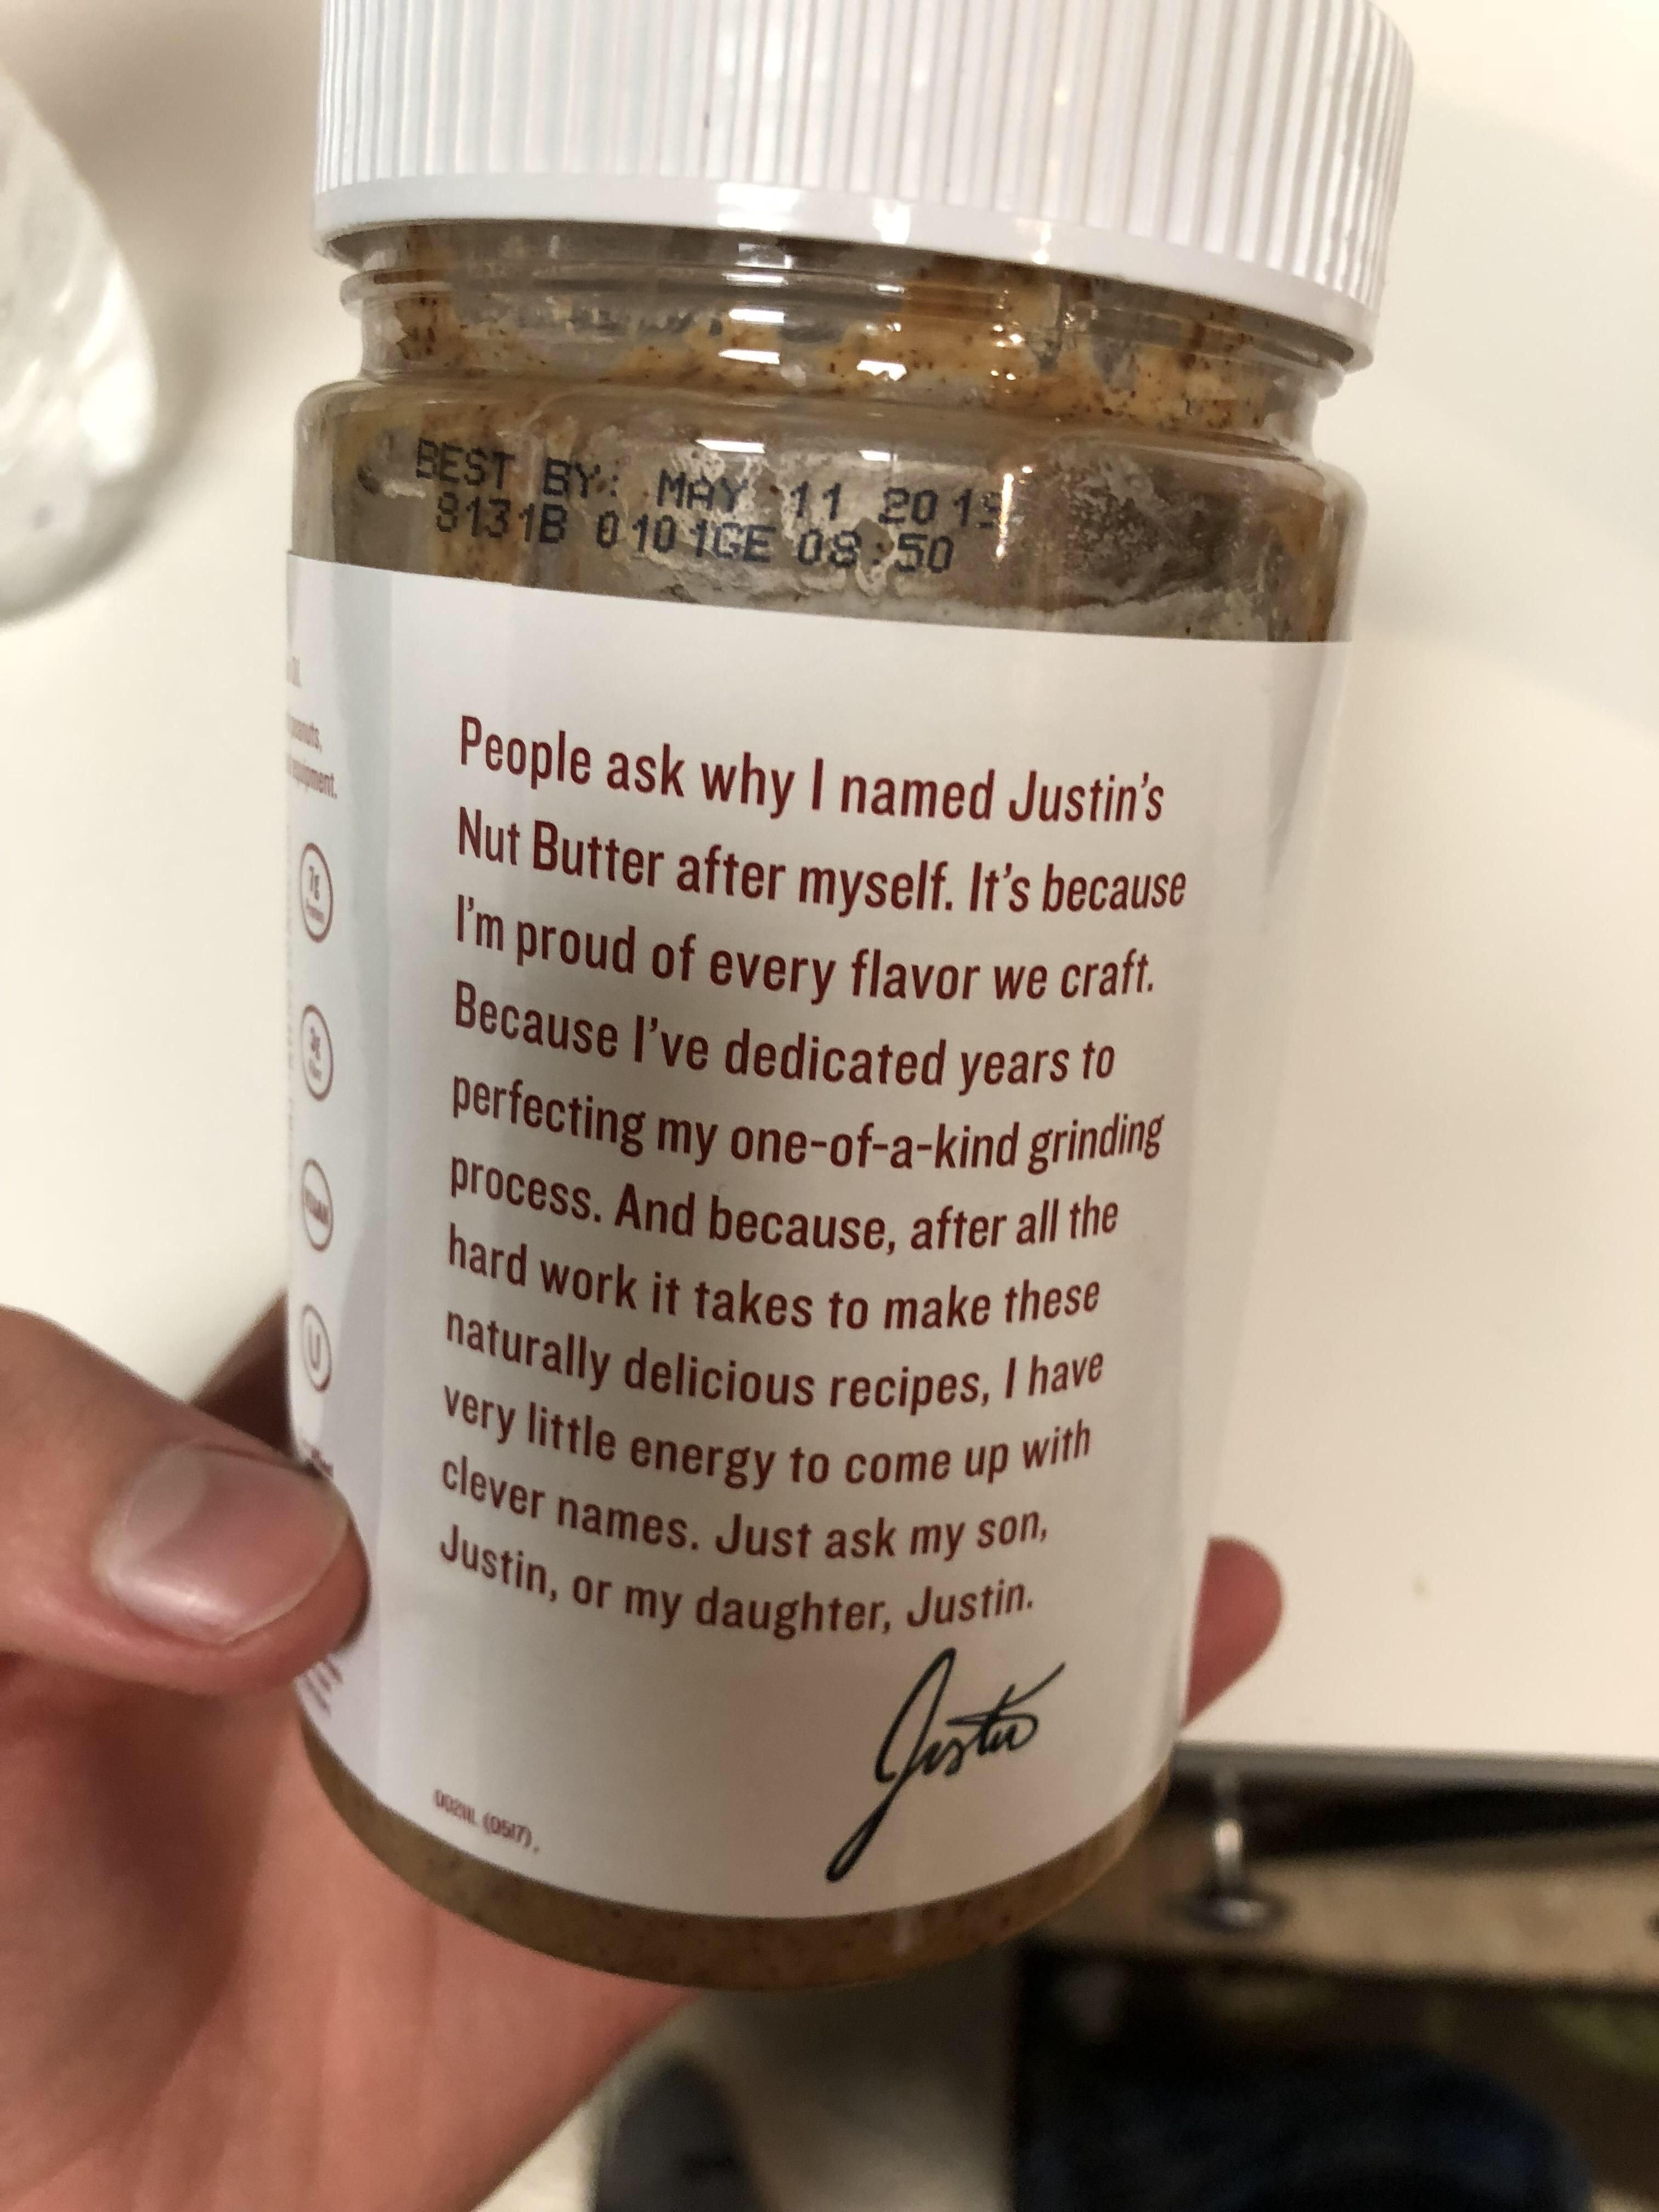 I sure love that nut butter!